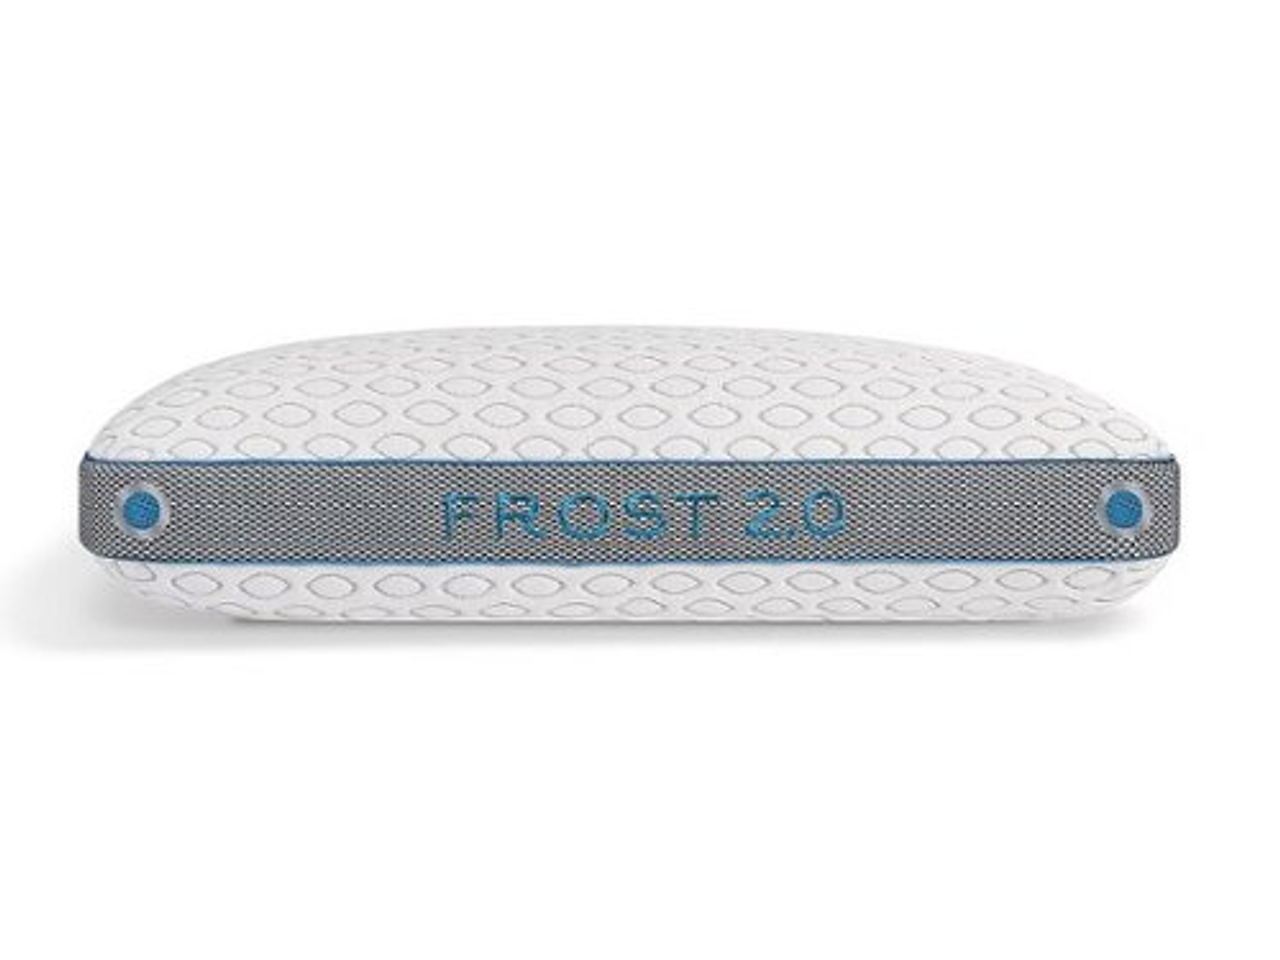 Bedgear - Frost Performance Pillow 2.0 - White